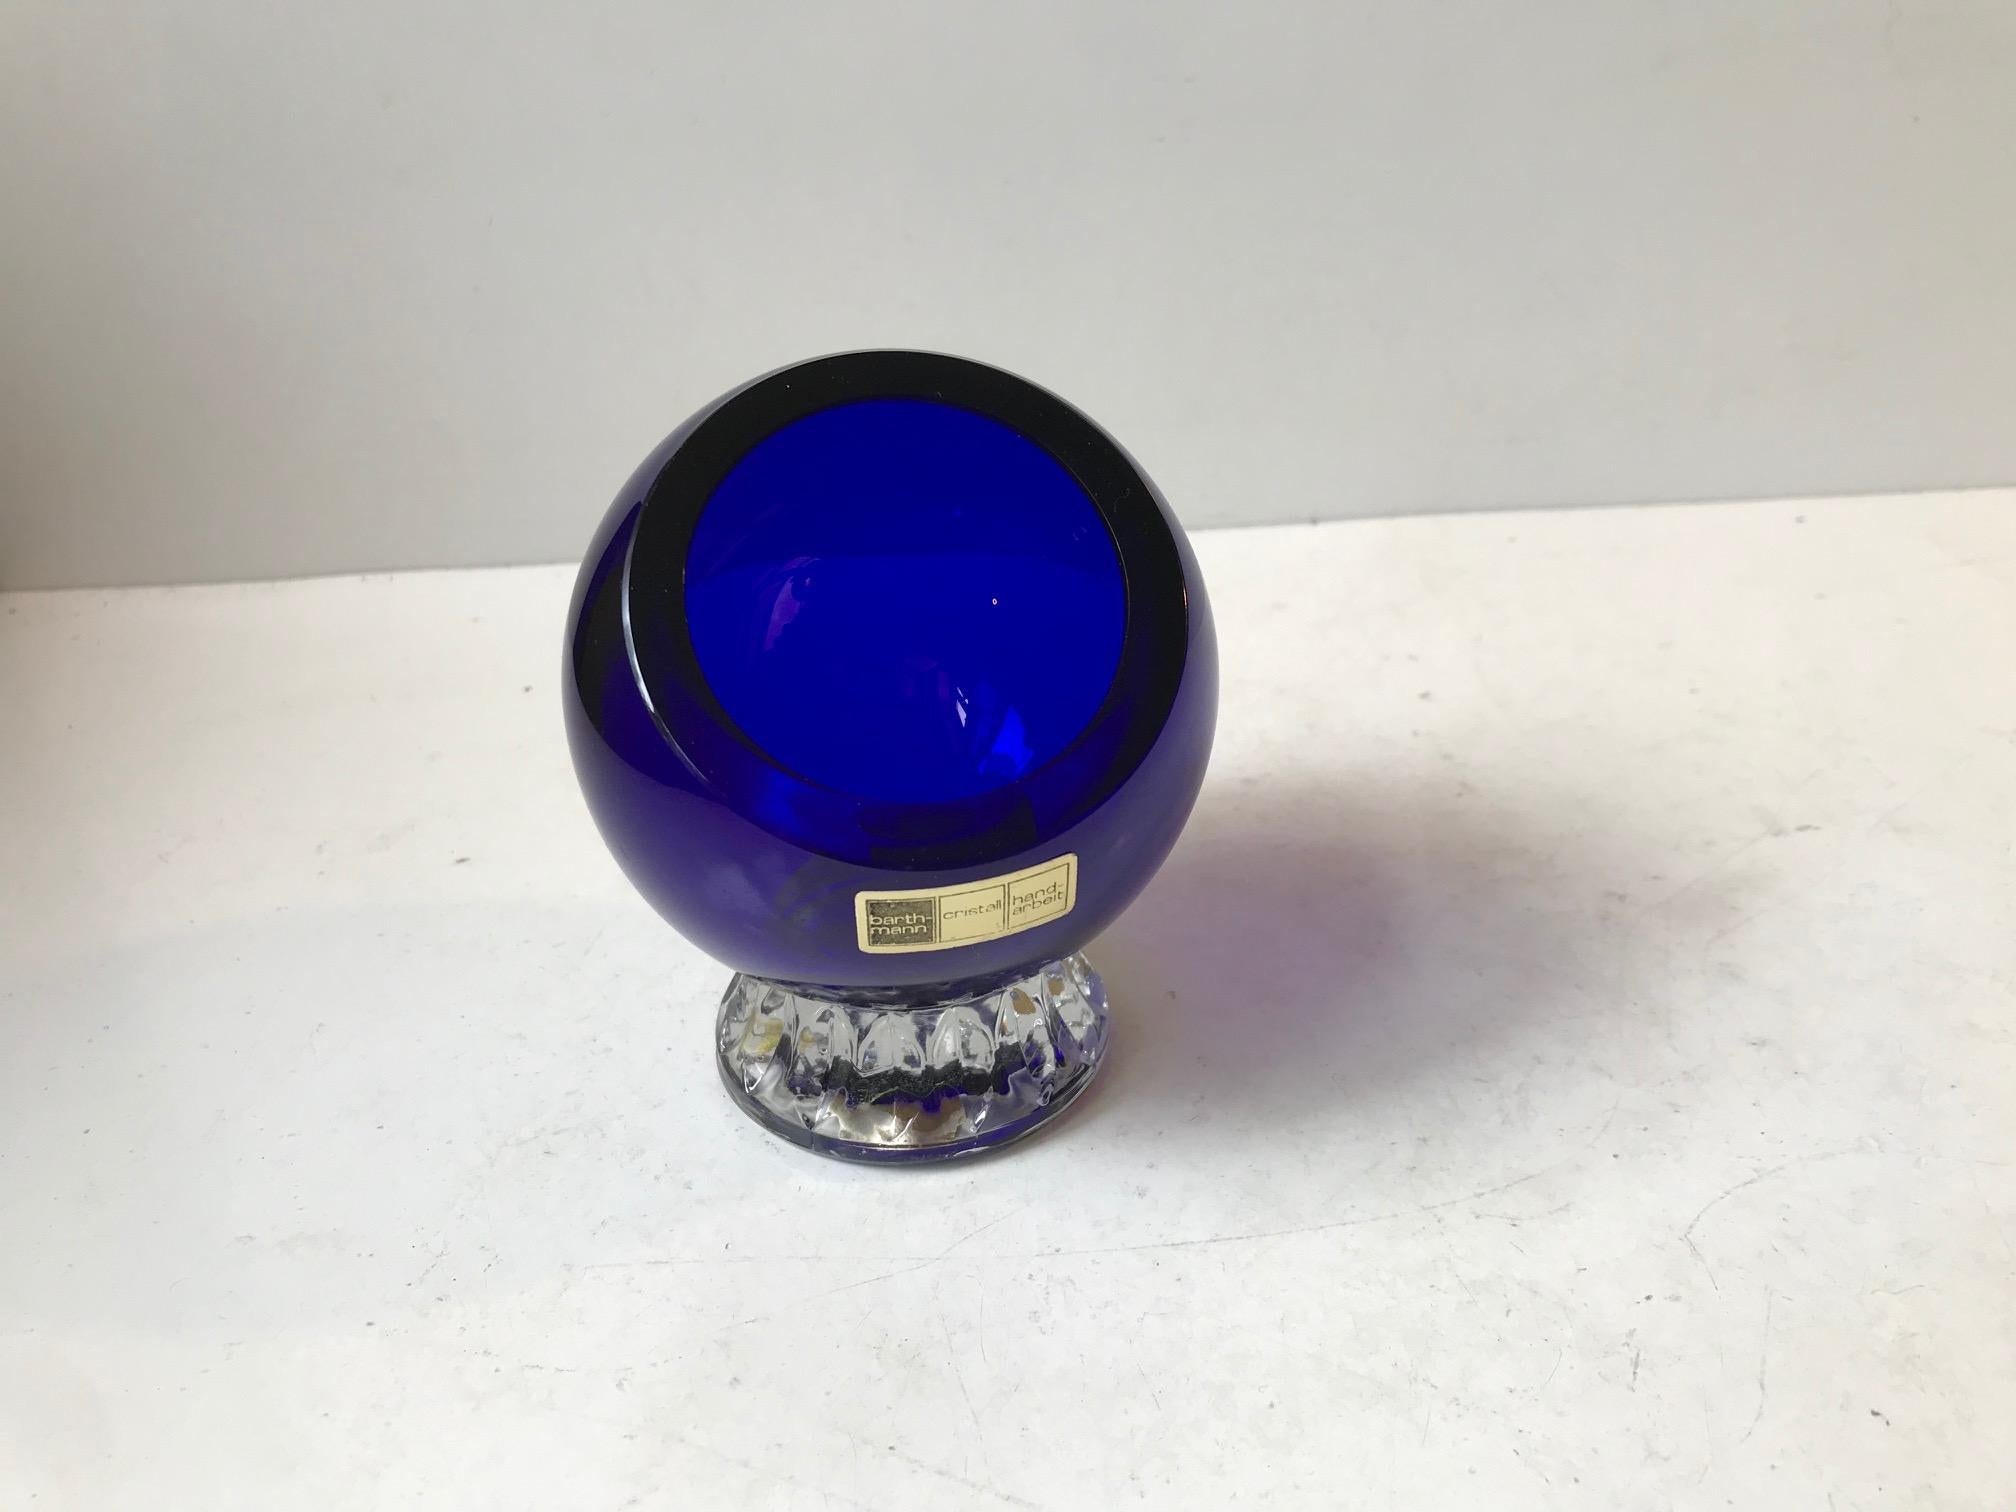 A small spherical footed ashtray in blue and clear handmade crystal. Designed and manufactured at Barthmann Glashütte in Germany circa 1970. It features maker mark and green table protecting filt to its underside. Measurements: H: 11, D: 8 cm.